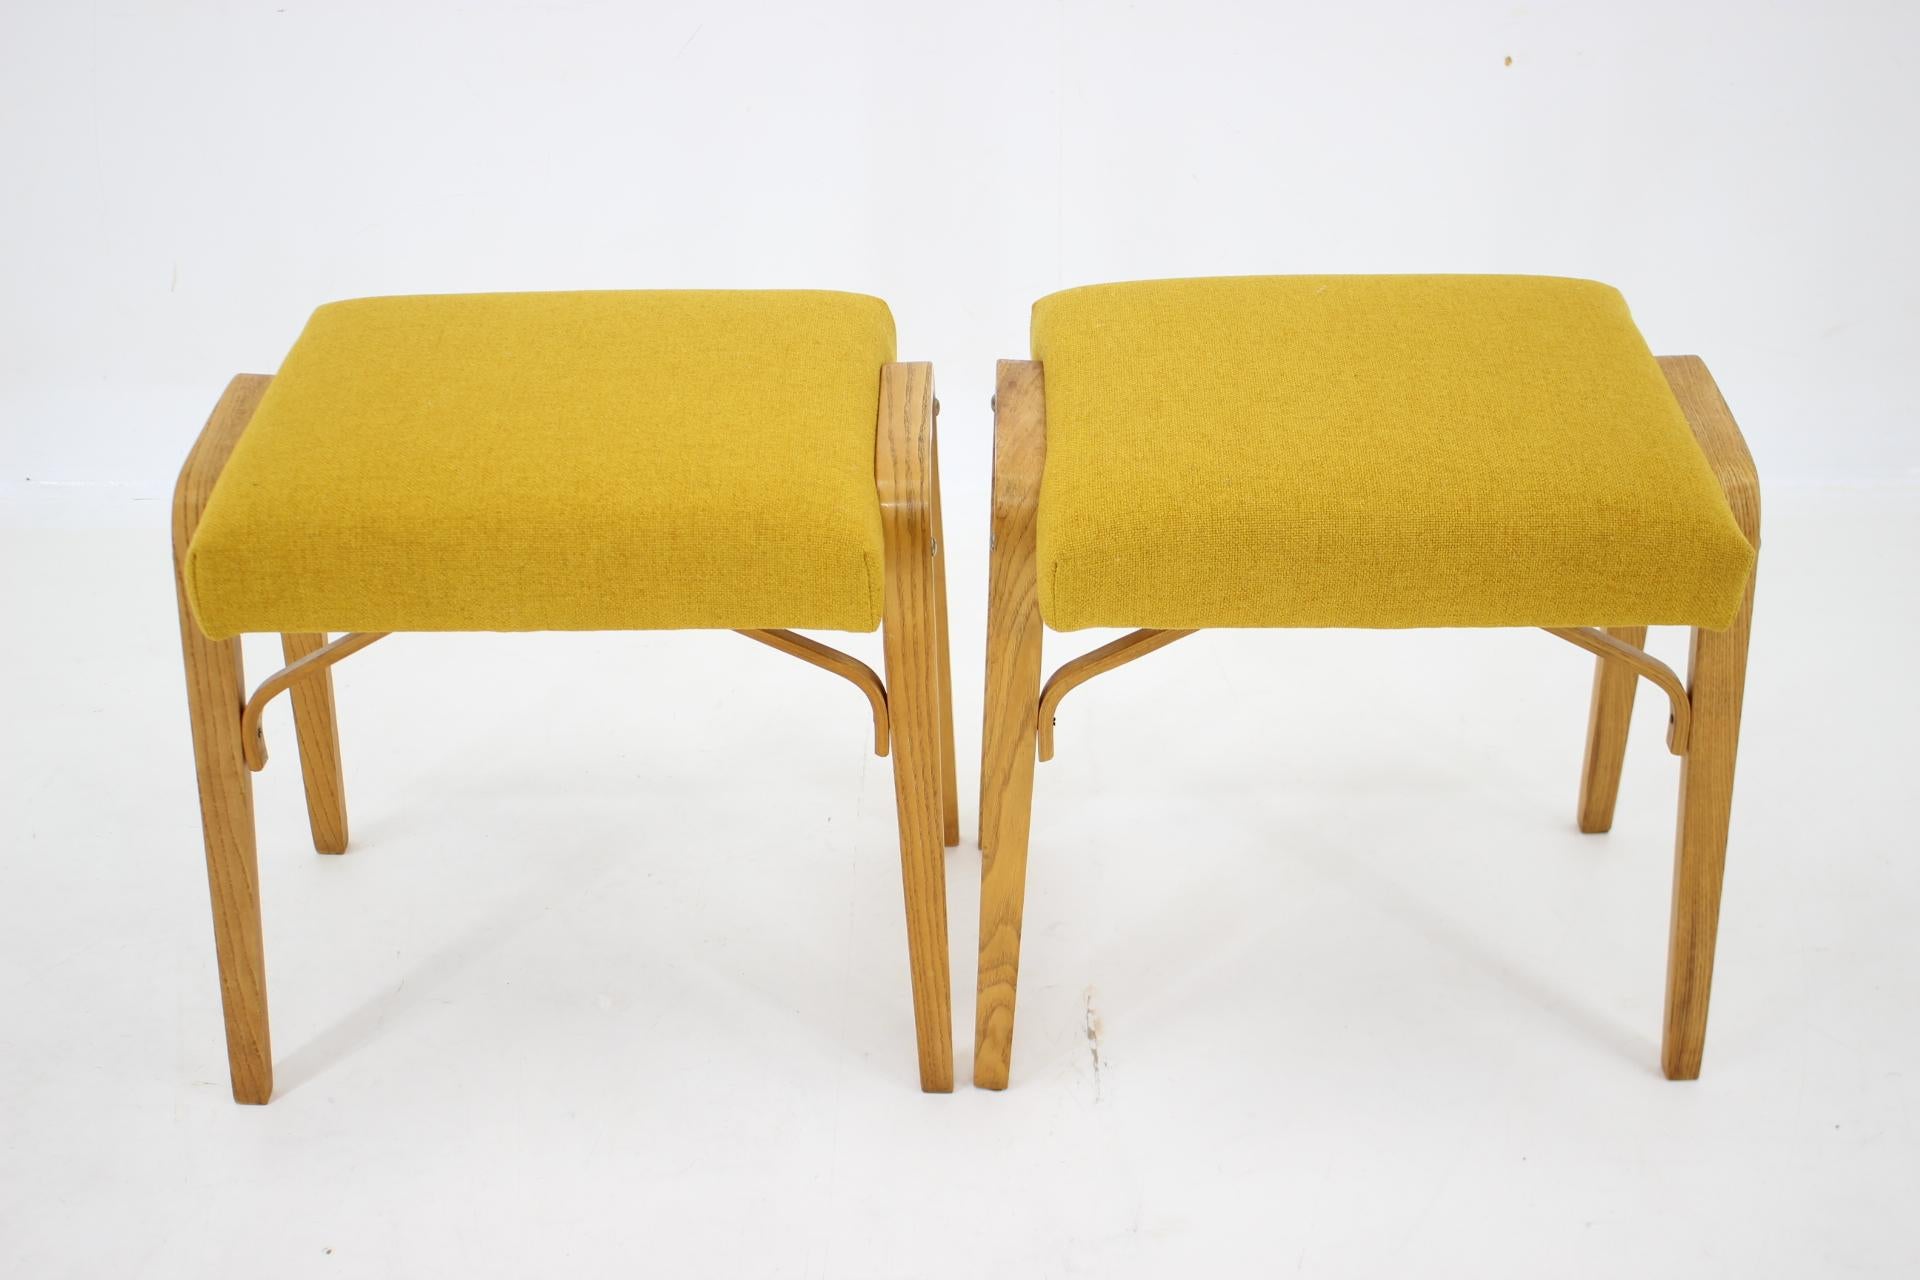 - carefully refurbished
- newly upholstered
- Beech plywood with maple veneer